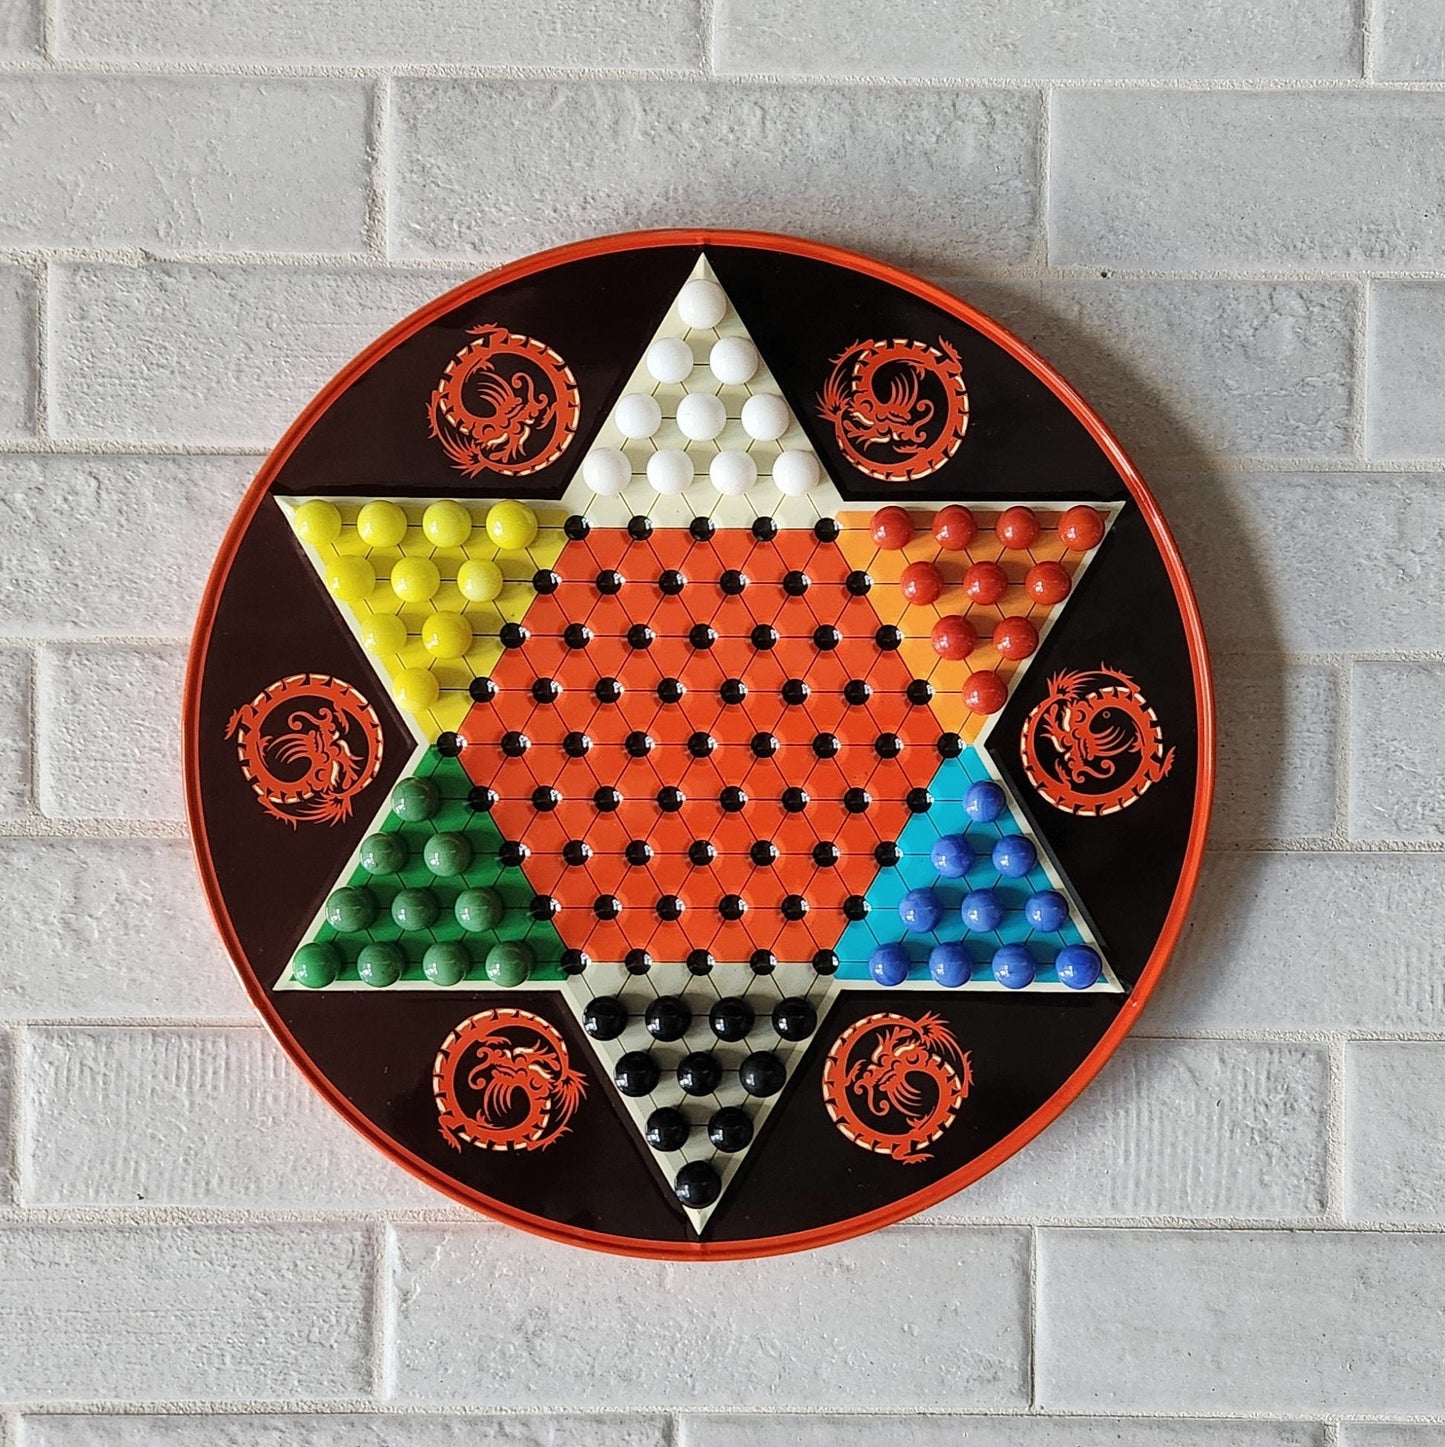 Display and Play 1970s Chinese Checkers Framed Board Game